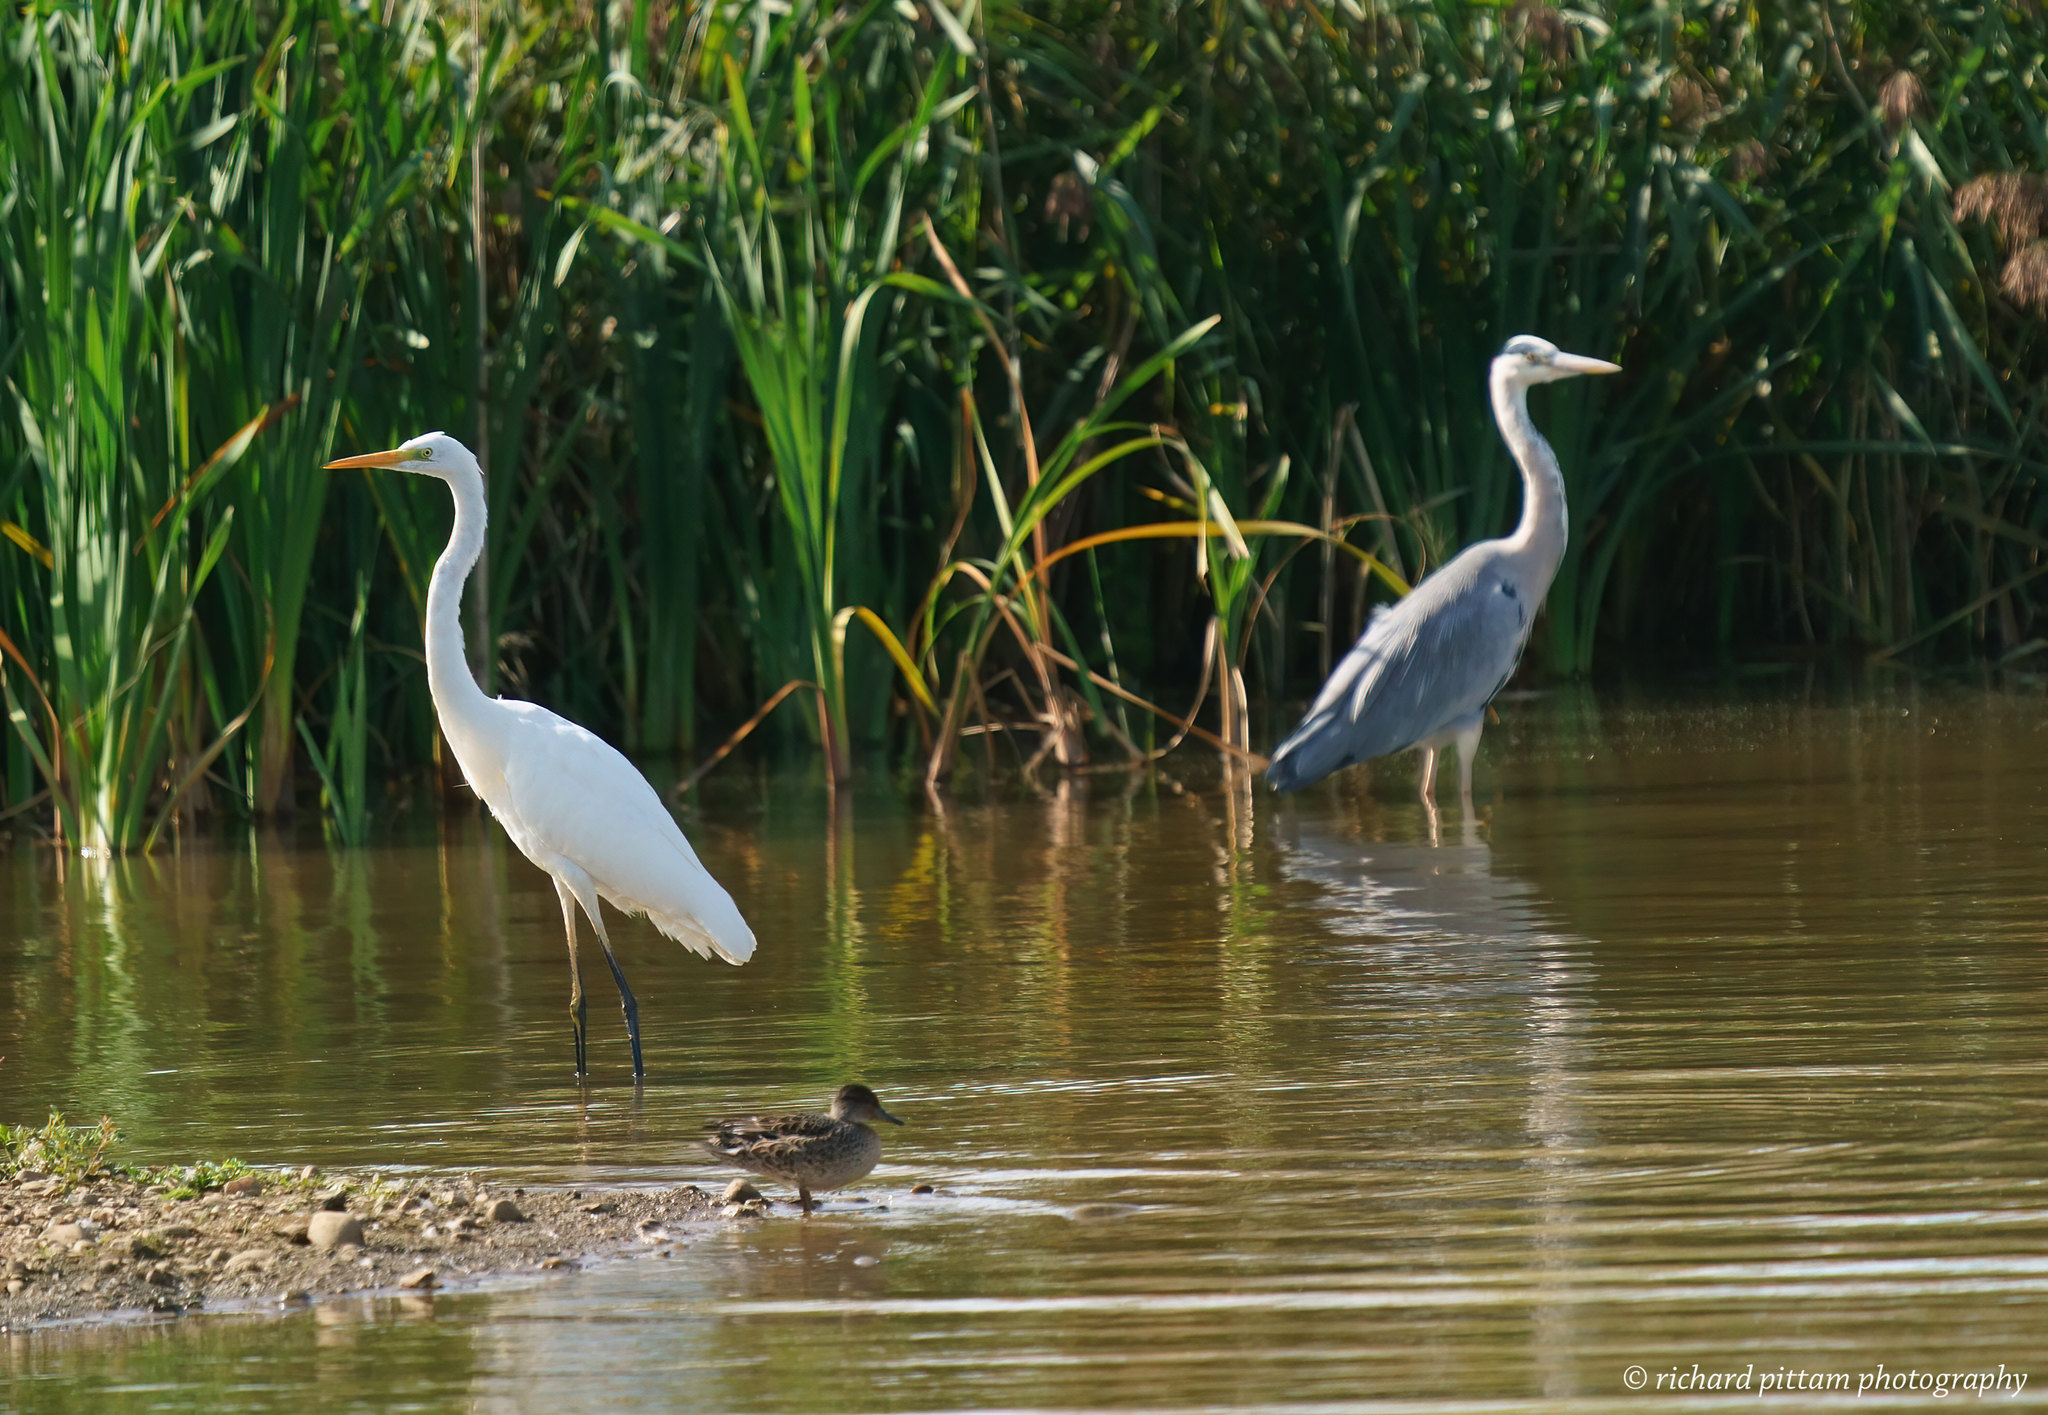 Great White Egret with Grey Heron and Teal on-looking...